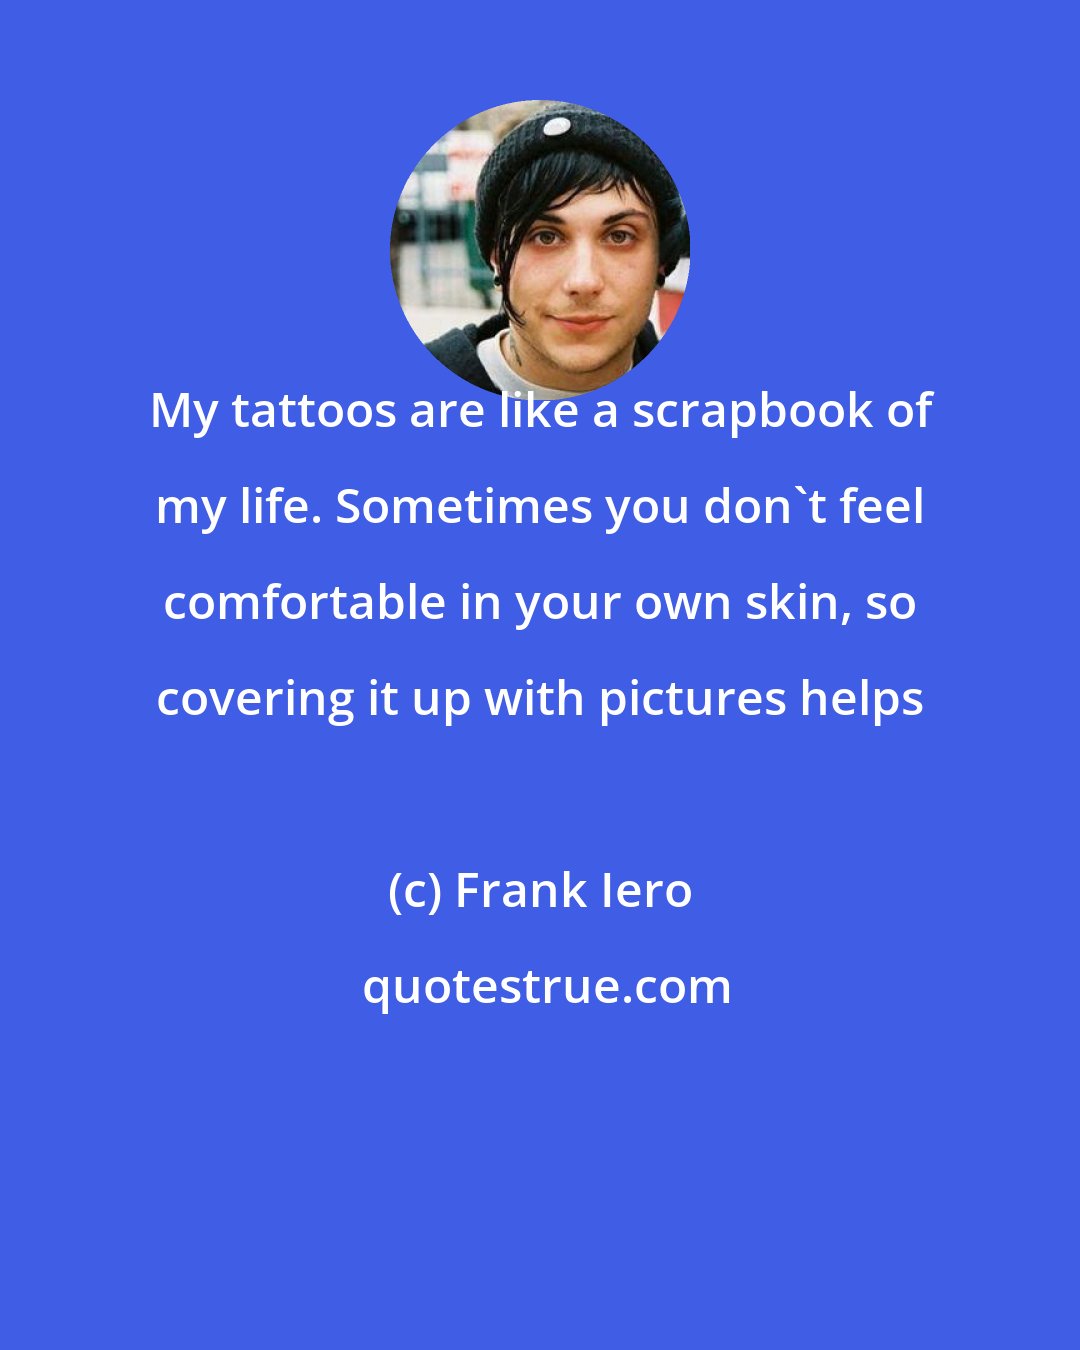 Frank Iero: My tattoos are like a scrapbook of my life. Sometimes you don't feel comfortable in your own skin, so covering it up with pictures helps